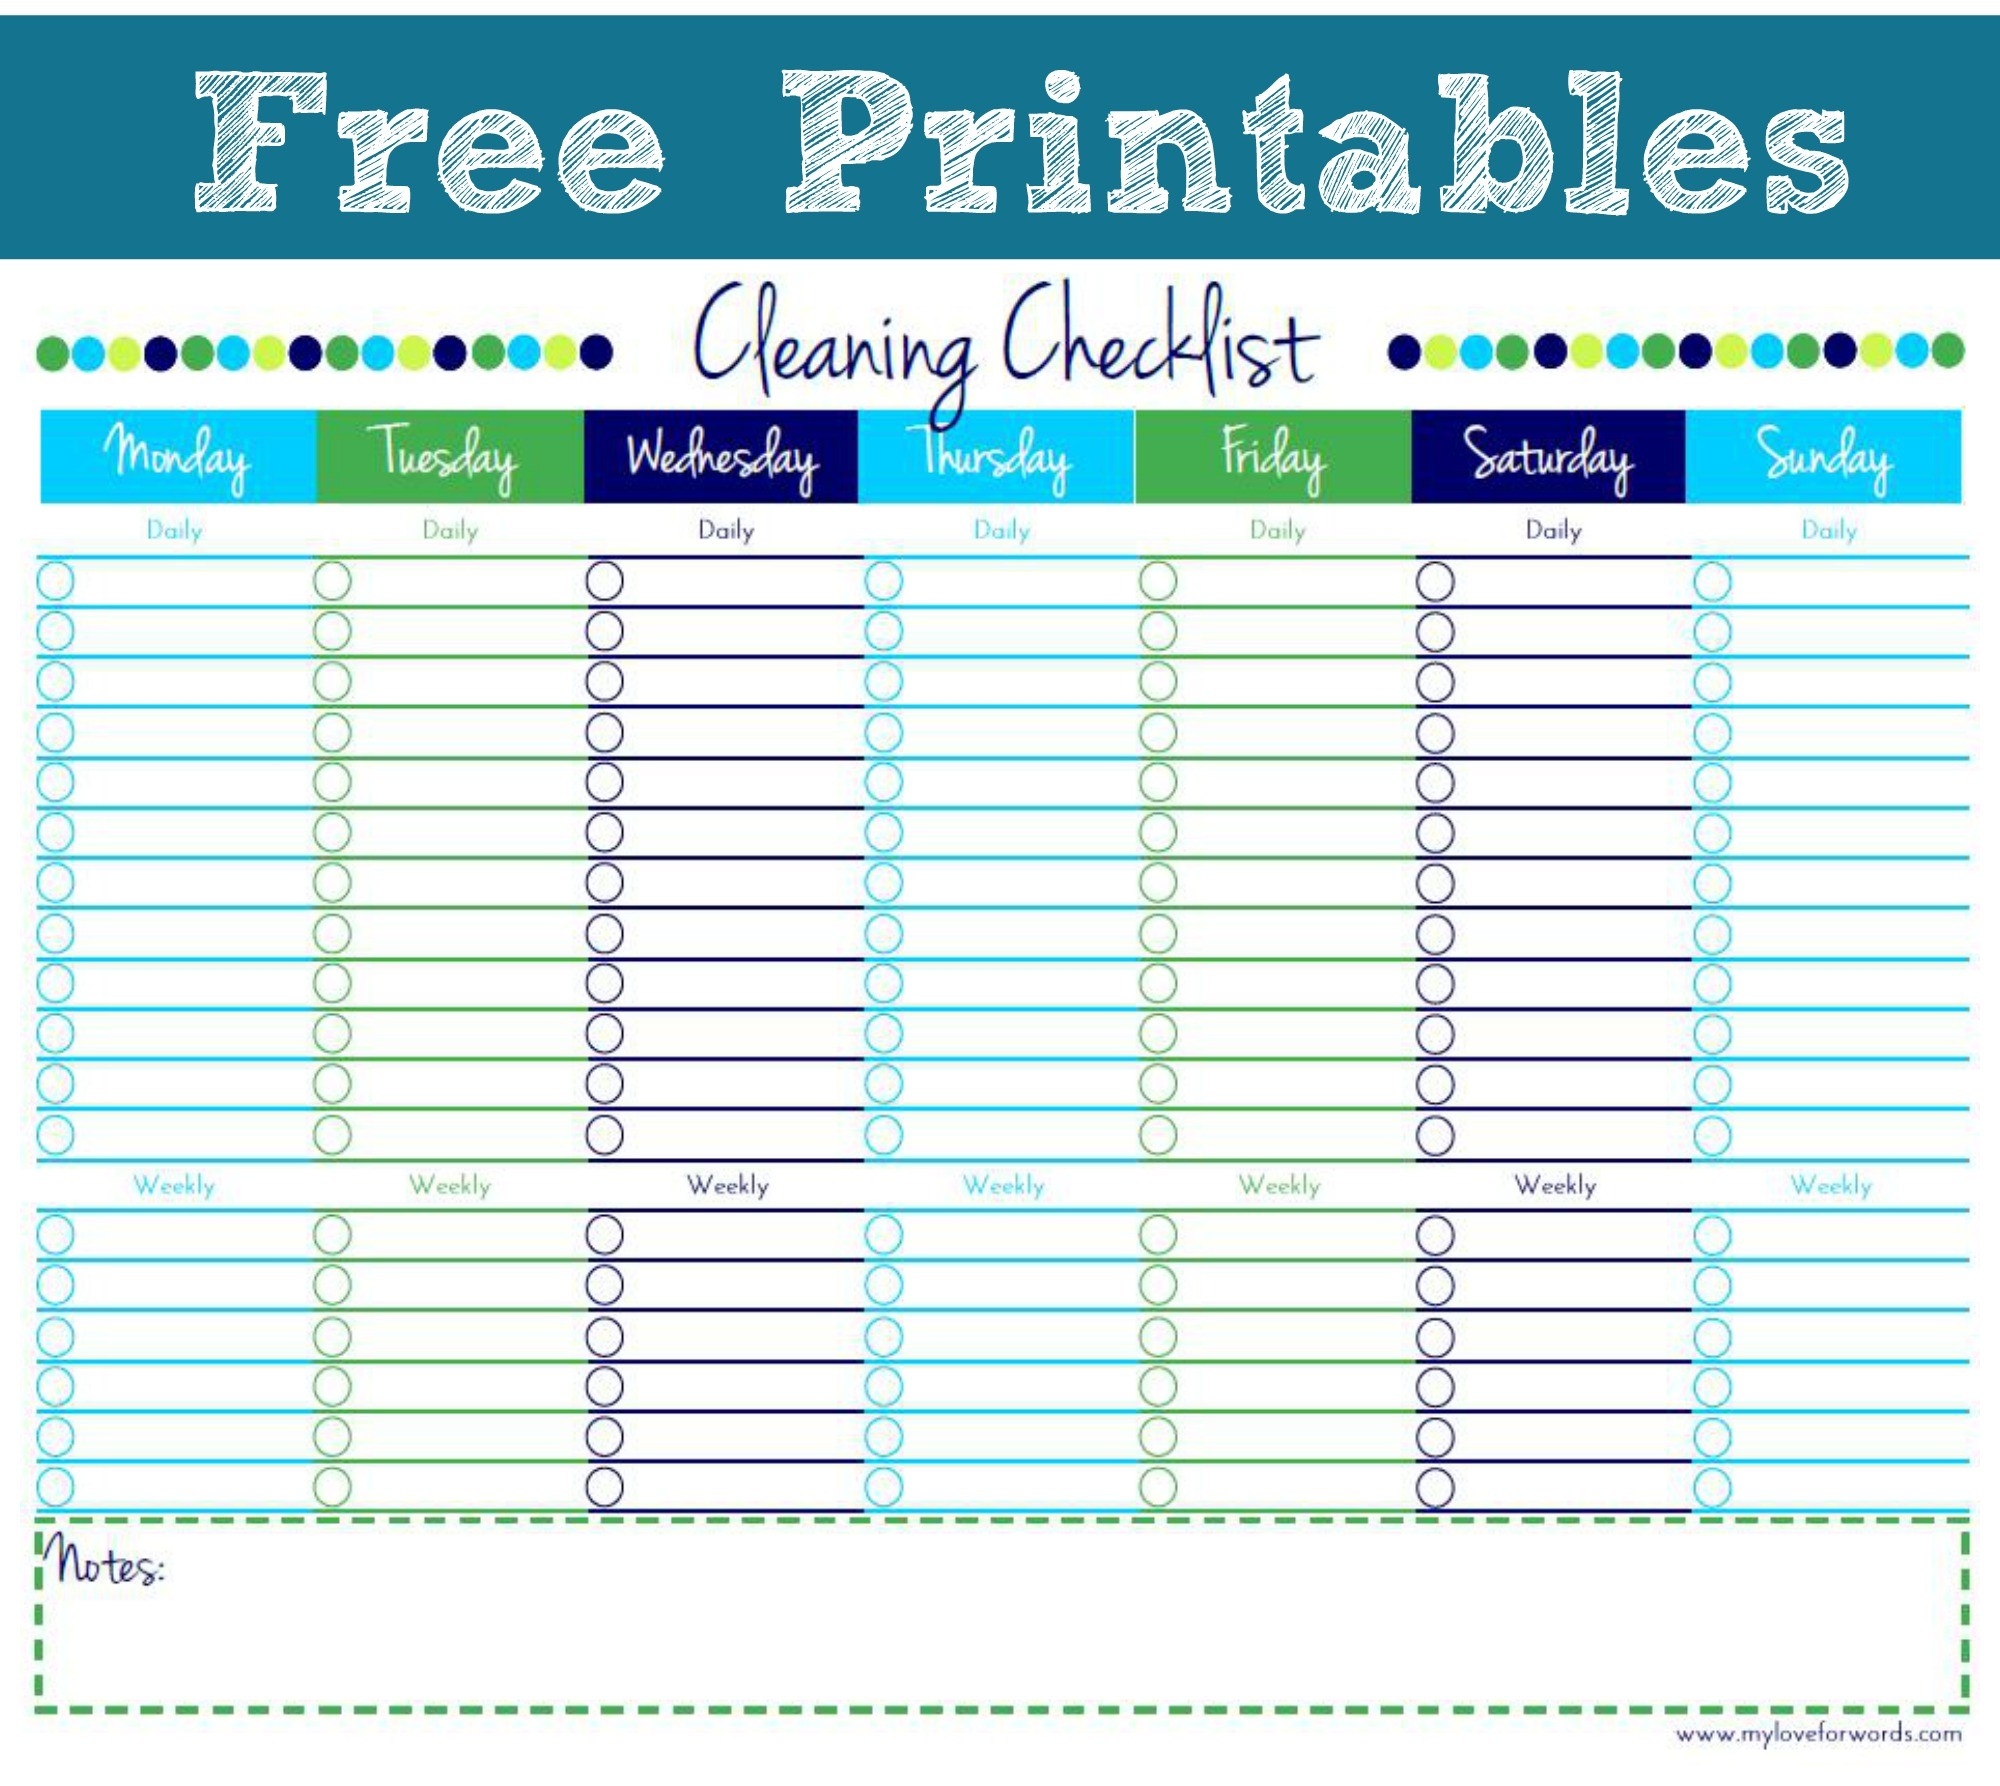 Cleaning Checklist {Free Printable}-Clean Template Monday To Firday